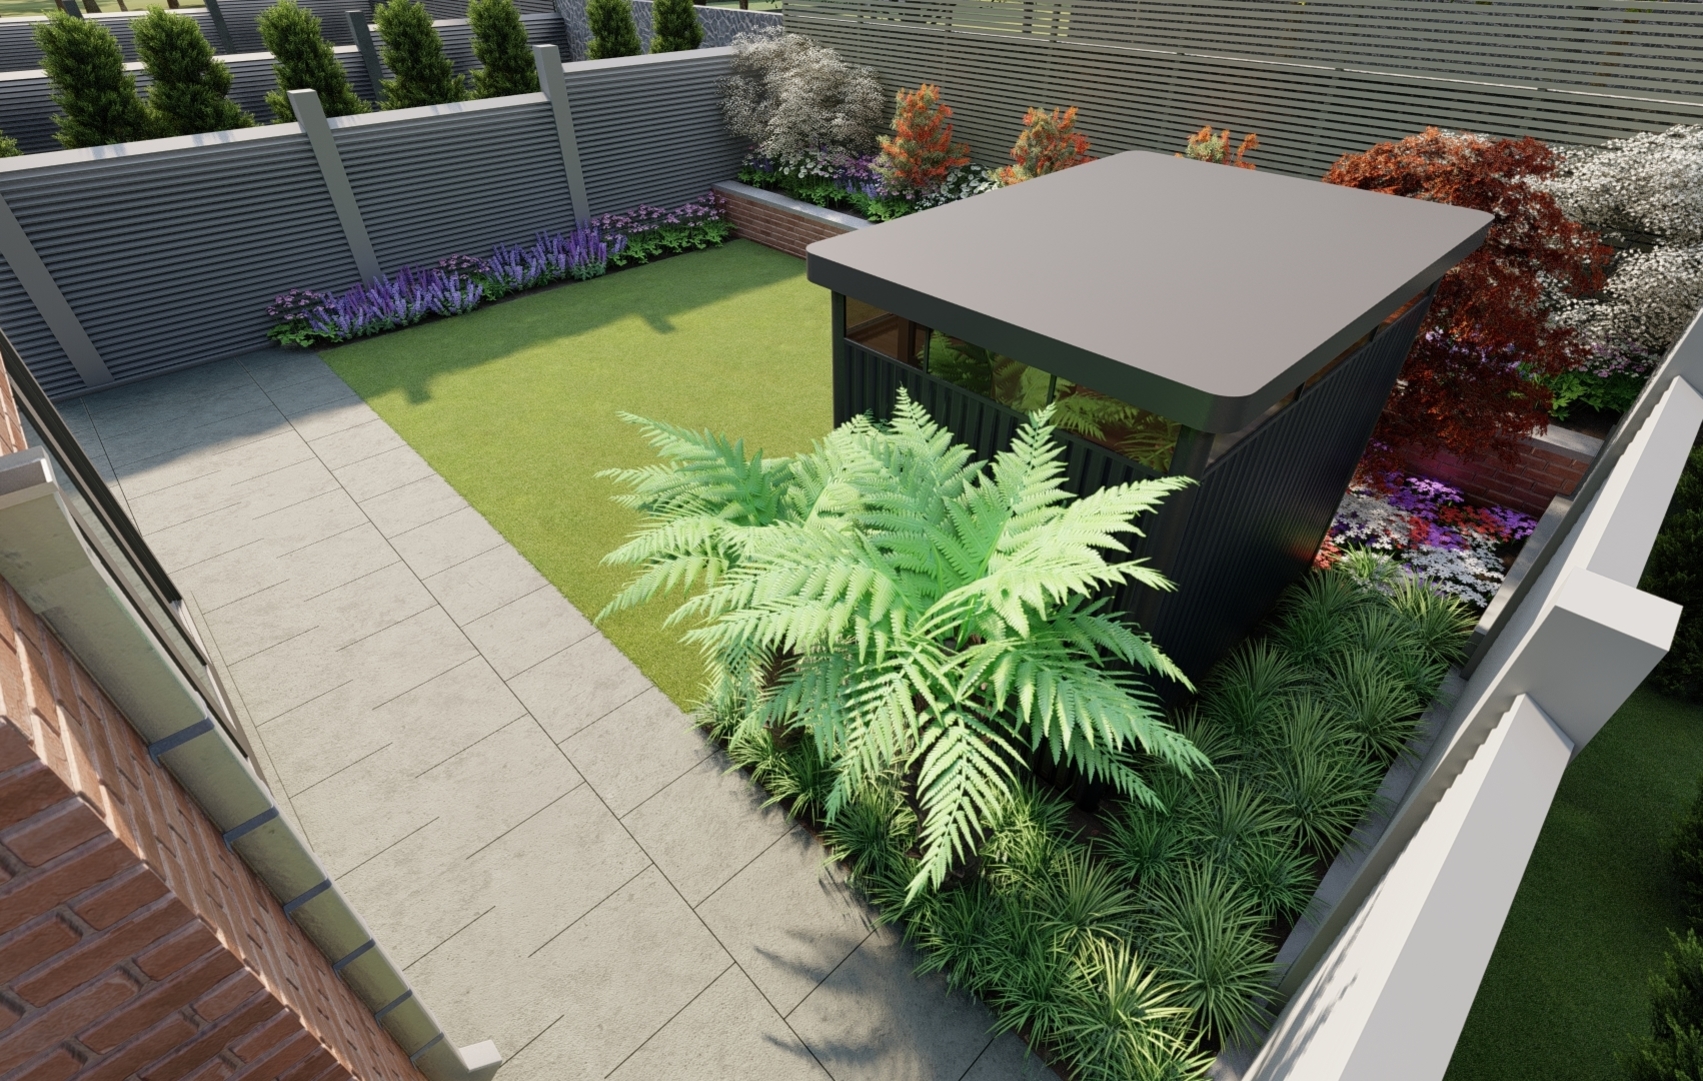 Design Ideas for small family garden in Blackrock featuring Biohort HighLine Garden Shed, Biohort Planters, synthetic lawn and bespoke fencing | Owen Chubb Garden Design